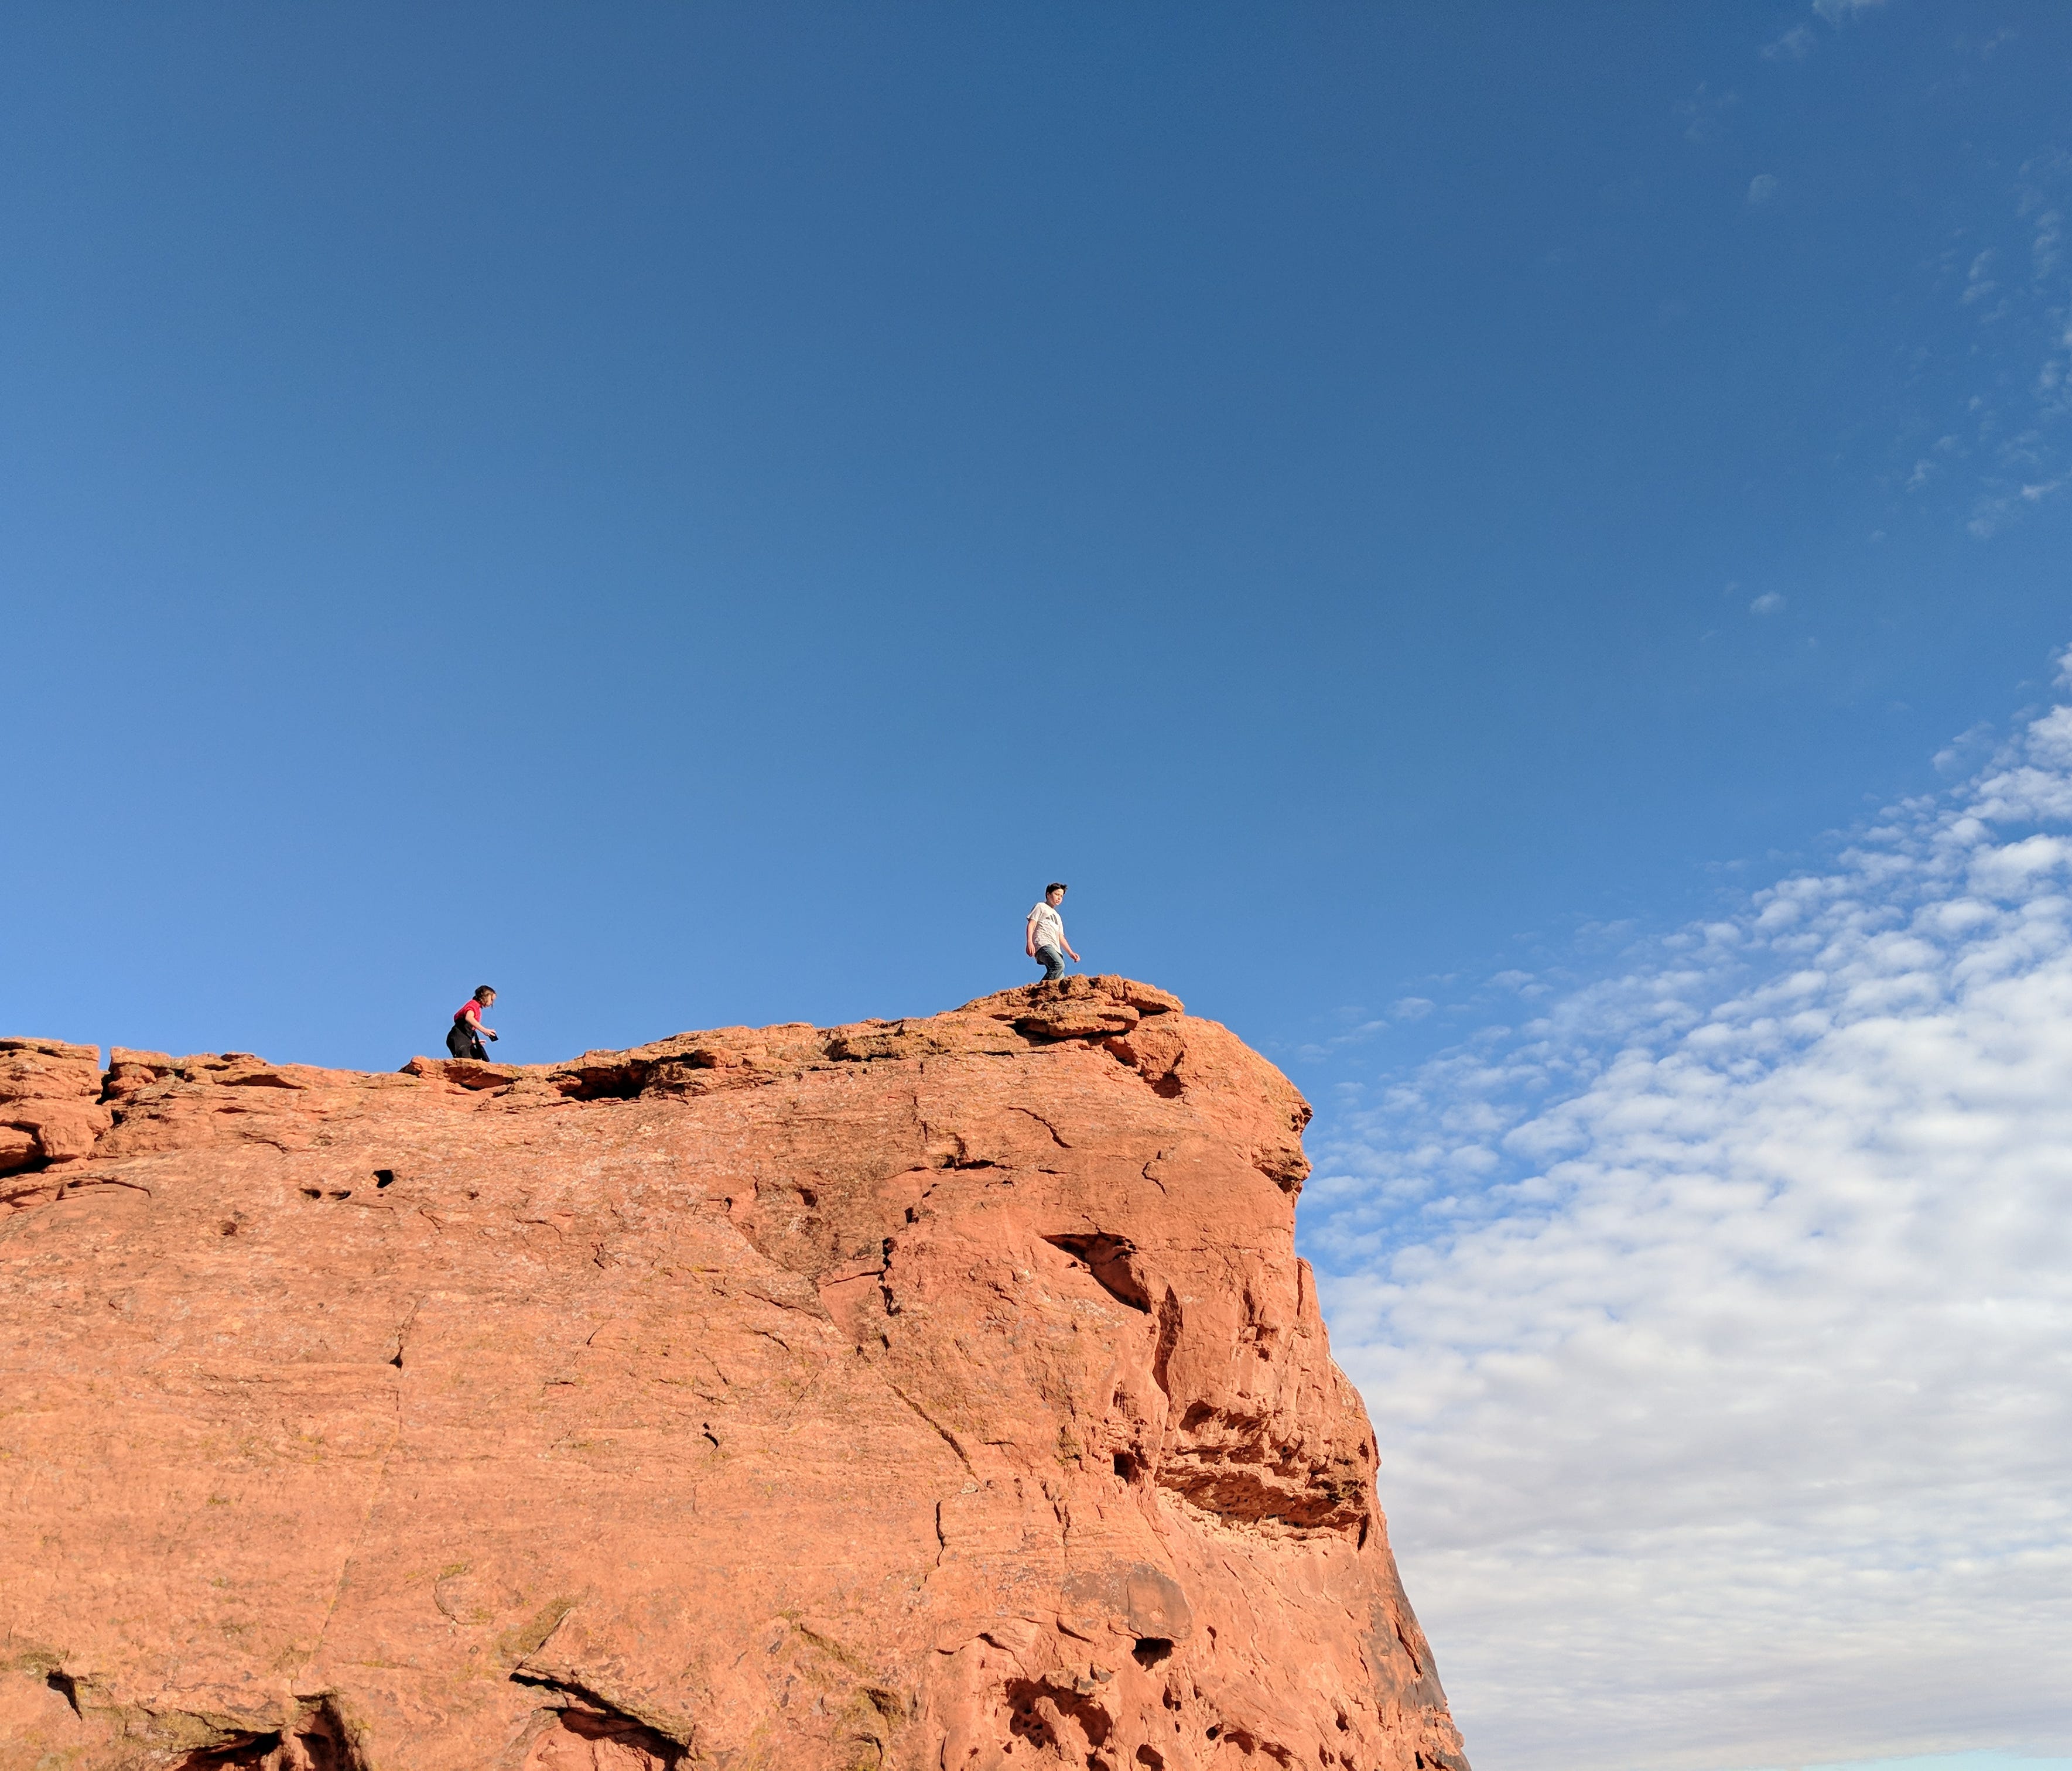 Erysse and Iden Elliott reach the summit at Red Cliffs National Conservation Area near St. George, Utah. National and state parks are always on the 